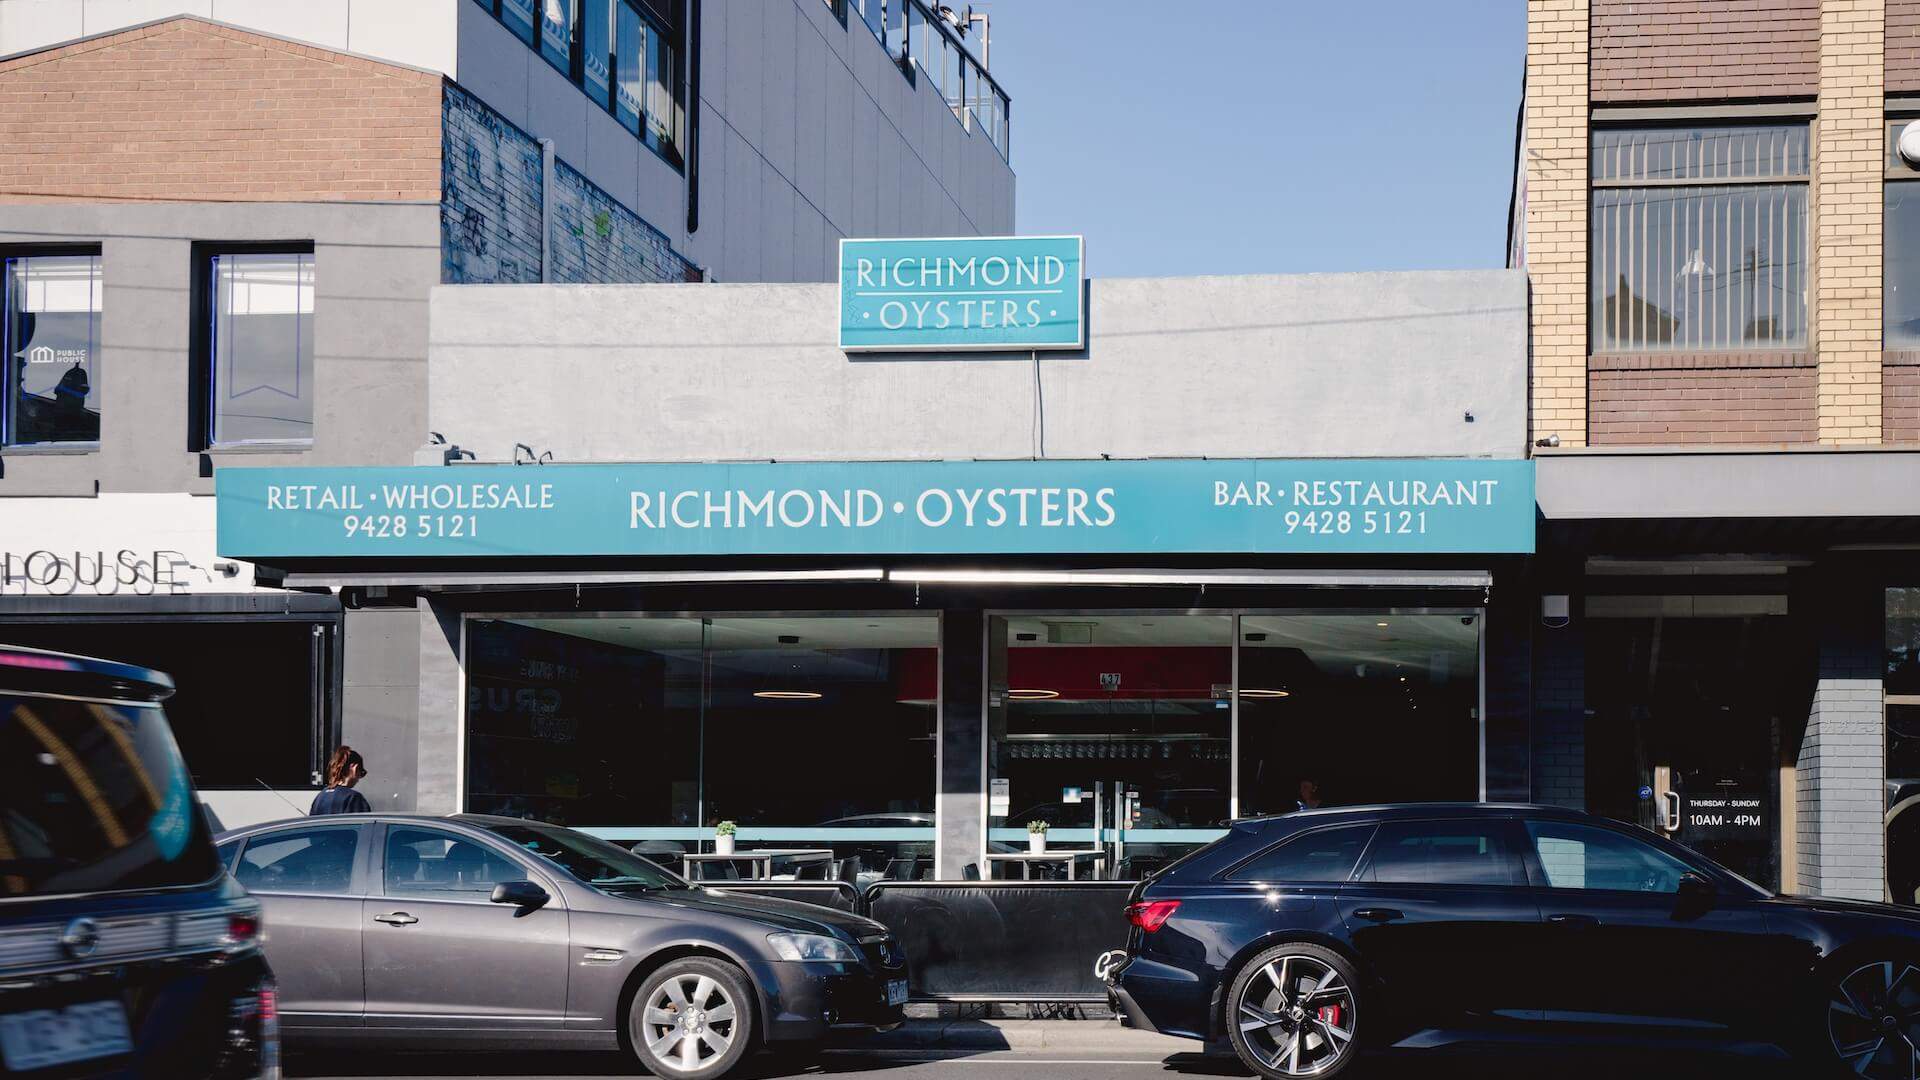 Richmond Oysters - Seafood Restaurant in melbourne.